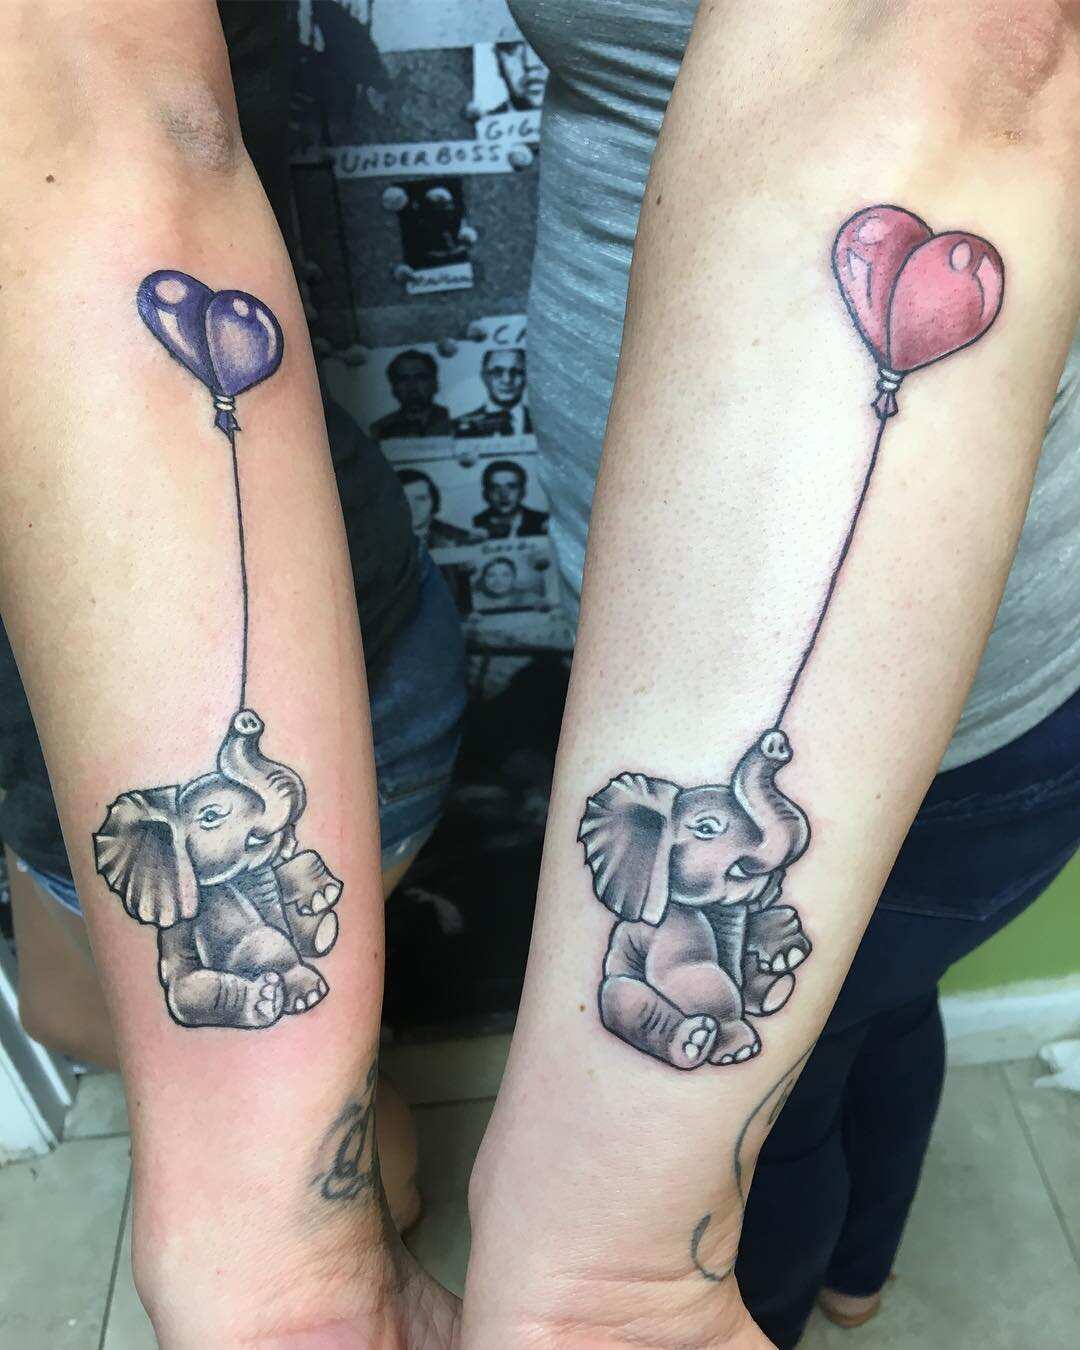 Donghwan Kim a.k.a EVAN based NYC Appointment Only February: booking  evantattooappts@gmail.… | Tiny elephant tattoo, Elephant tattoo design, Elephant  tattoo small